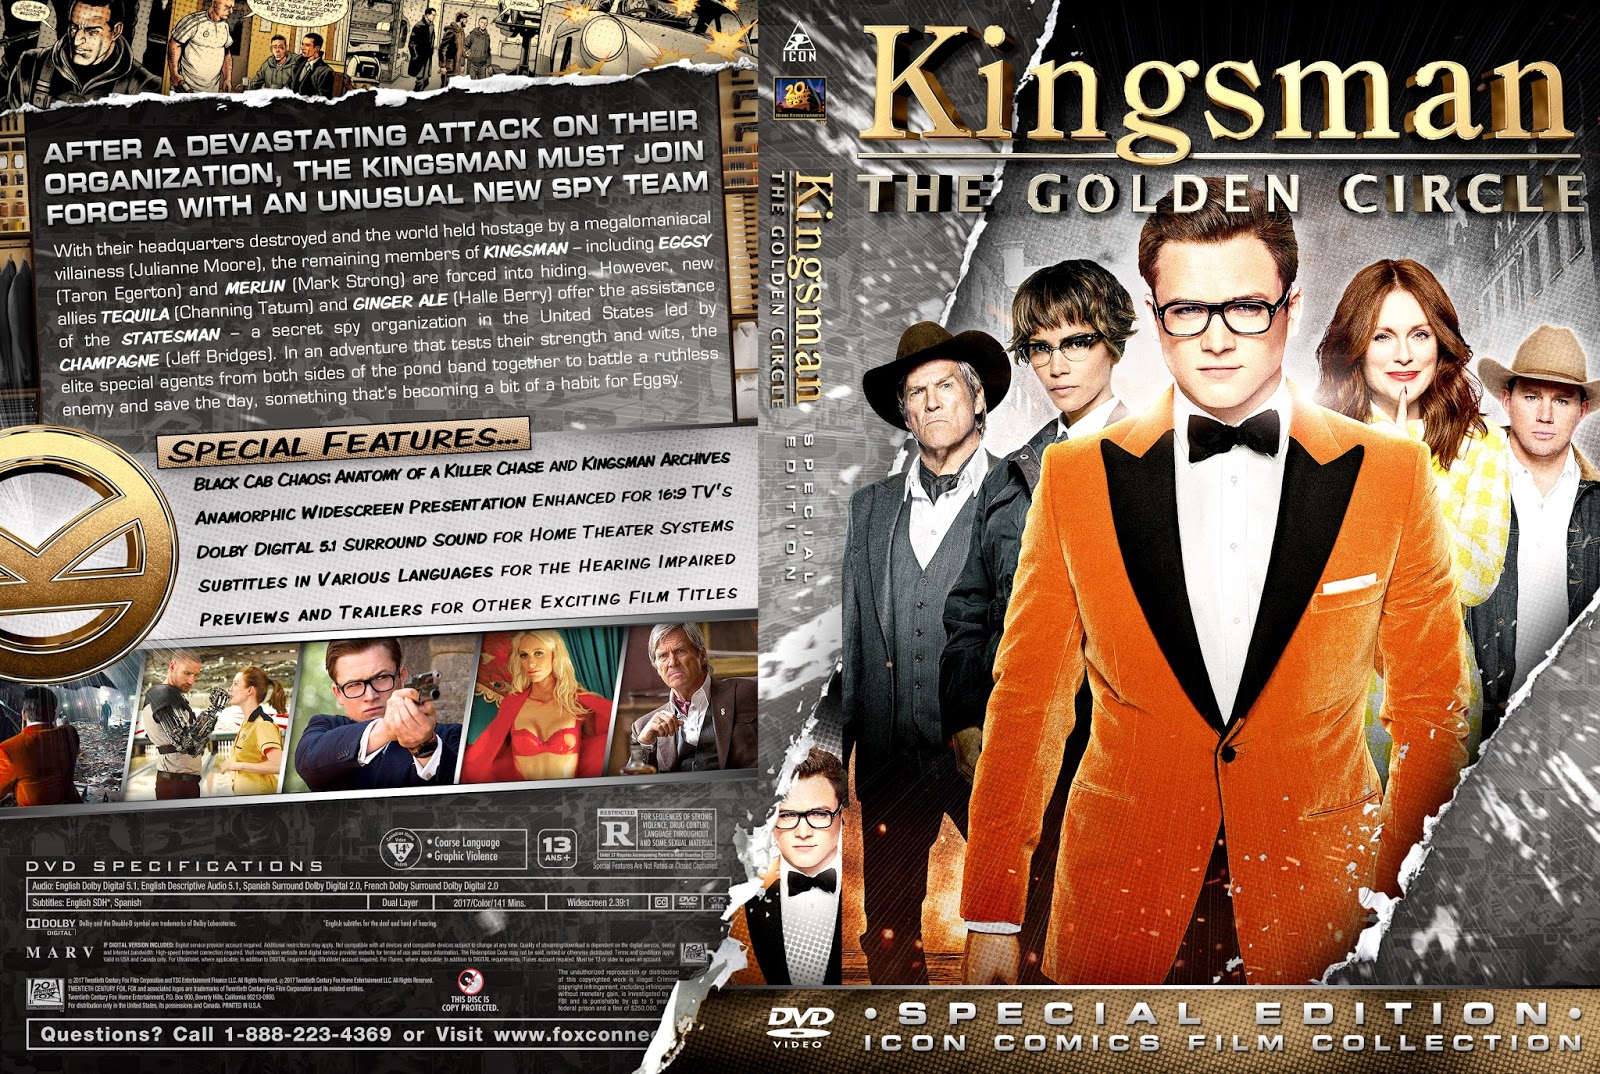 Covers Box Sk Kingsman The Golden Circle High Quality Dvd Blueray Movie